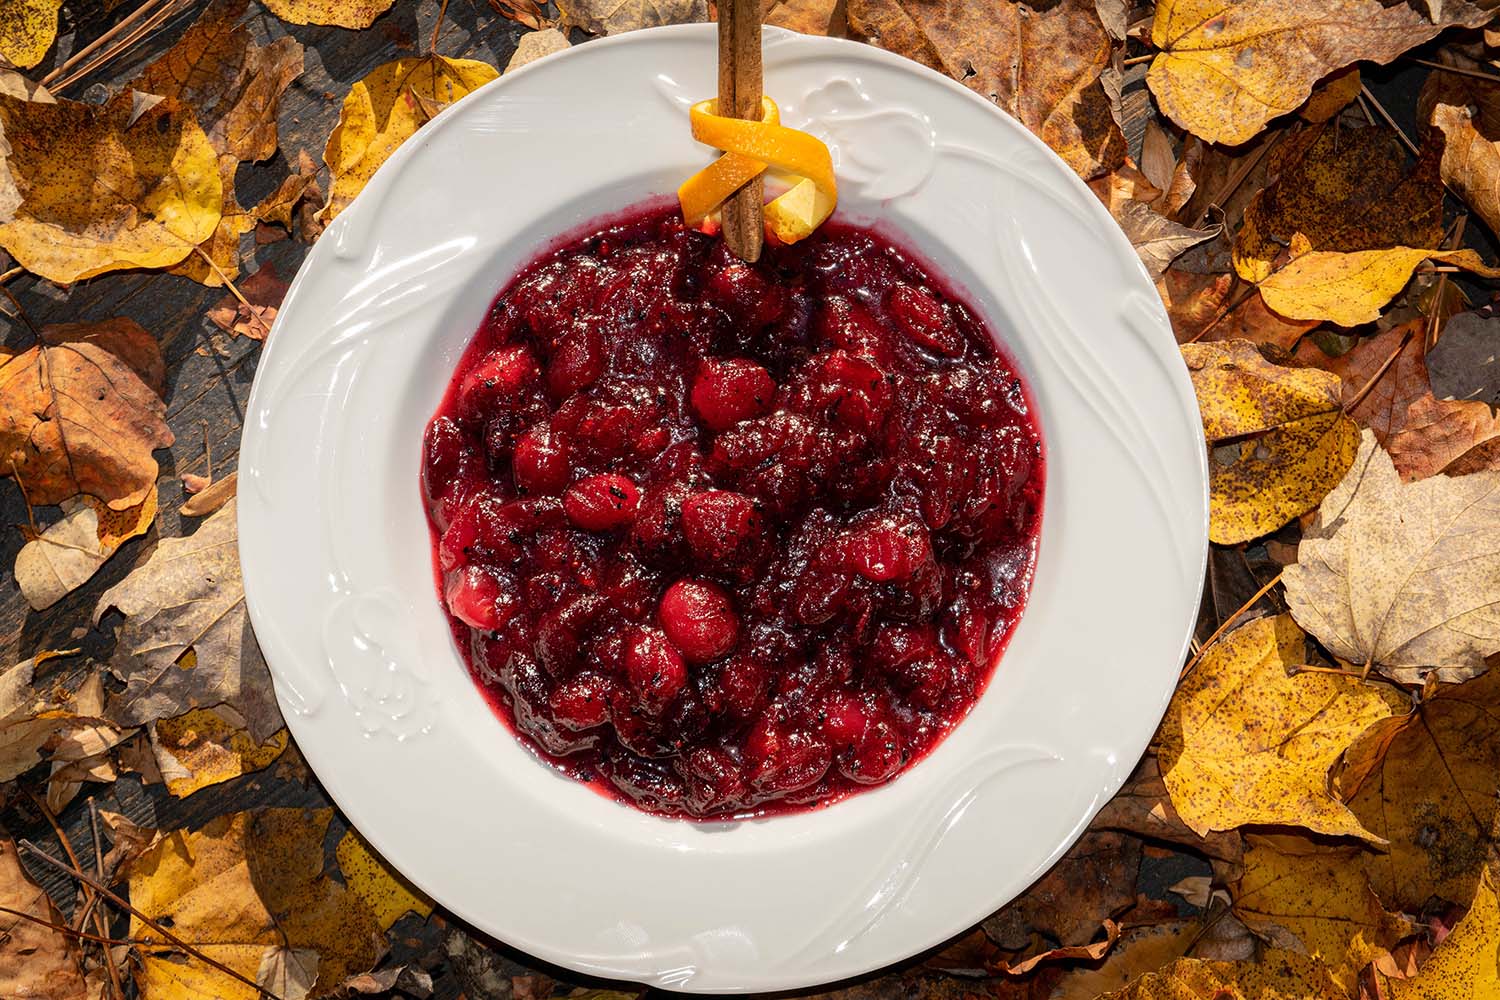 Black Truffle Cranberry Sauce made with Truffletopia Black Truffle Sauce made with Truffletopia Black Truffle Sauce